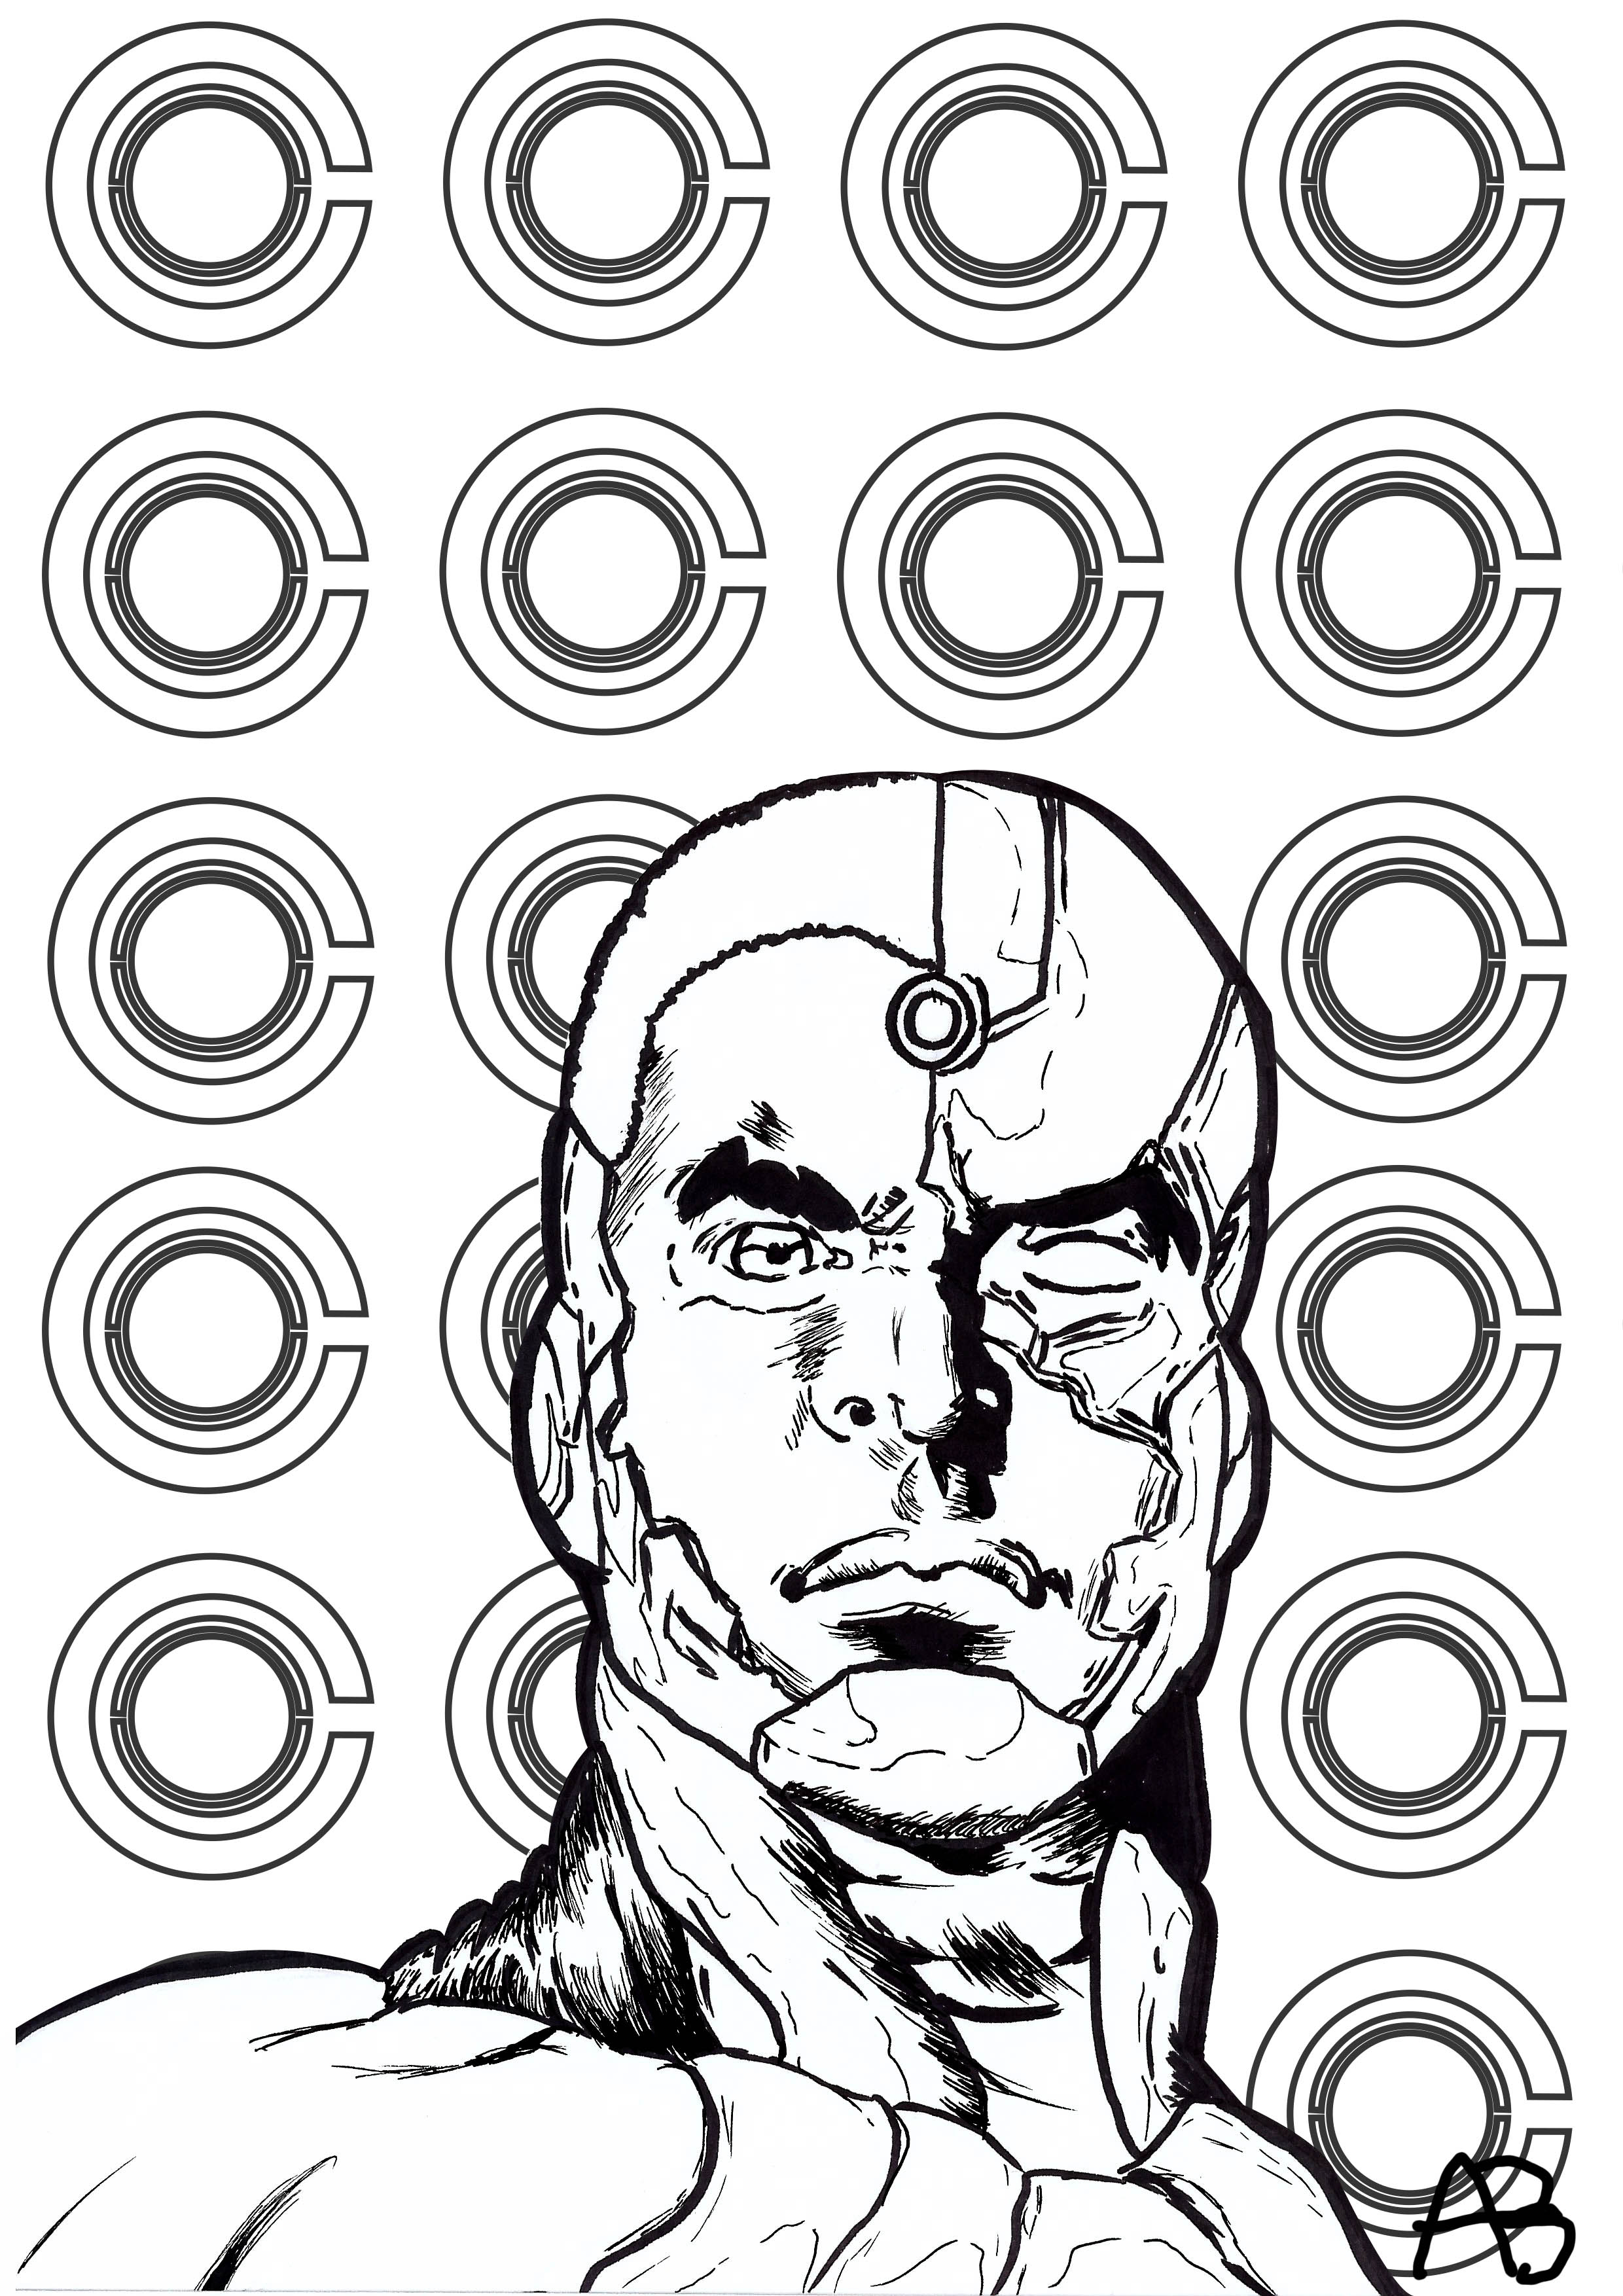 Coloring page inspired by Cyborg (DC Comics character)